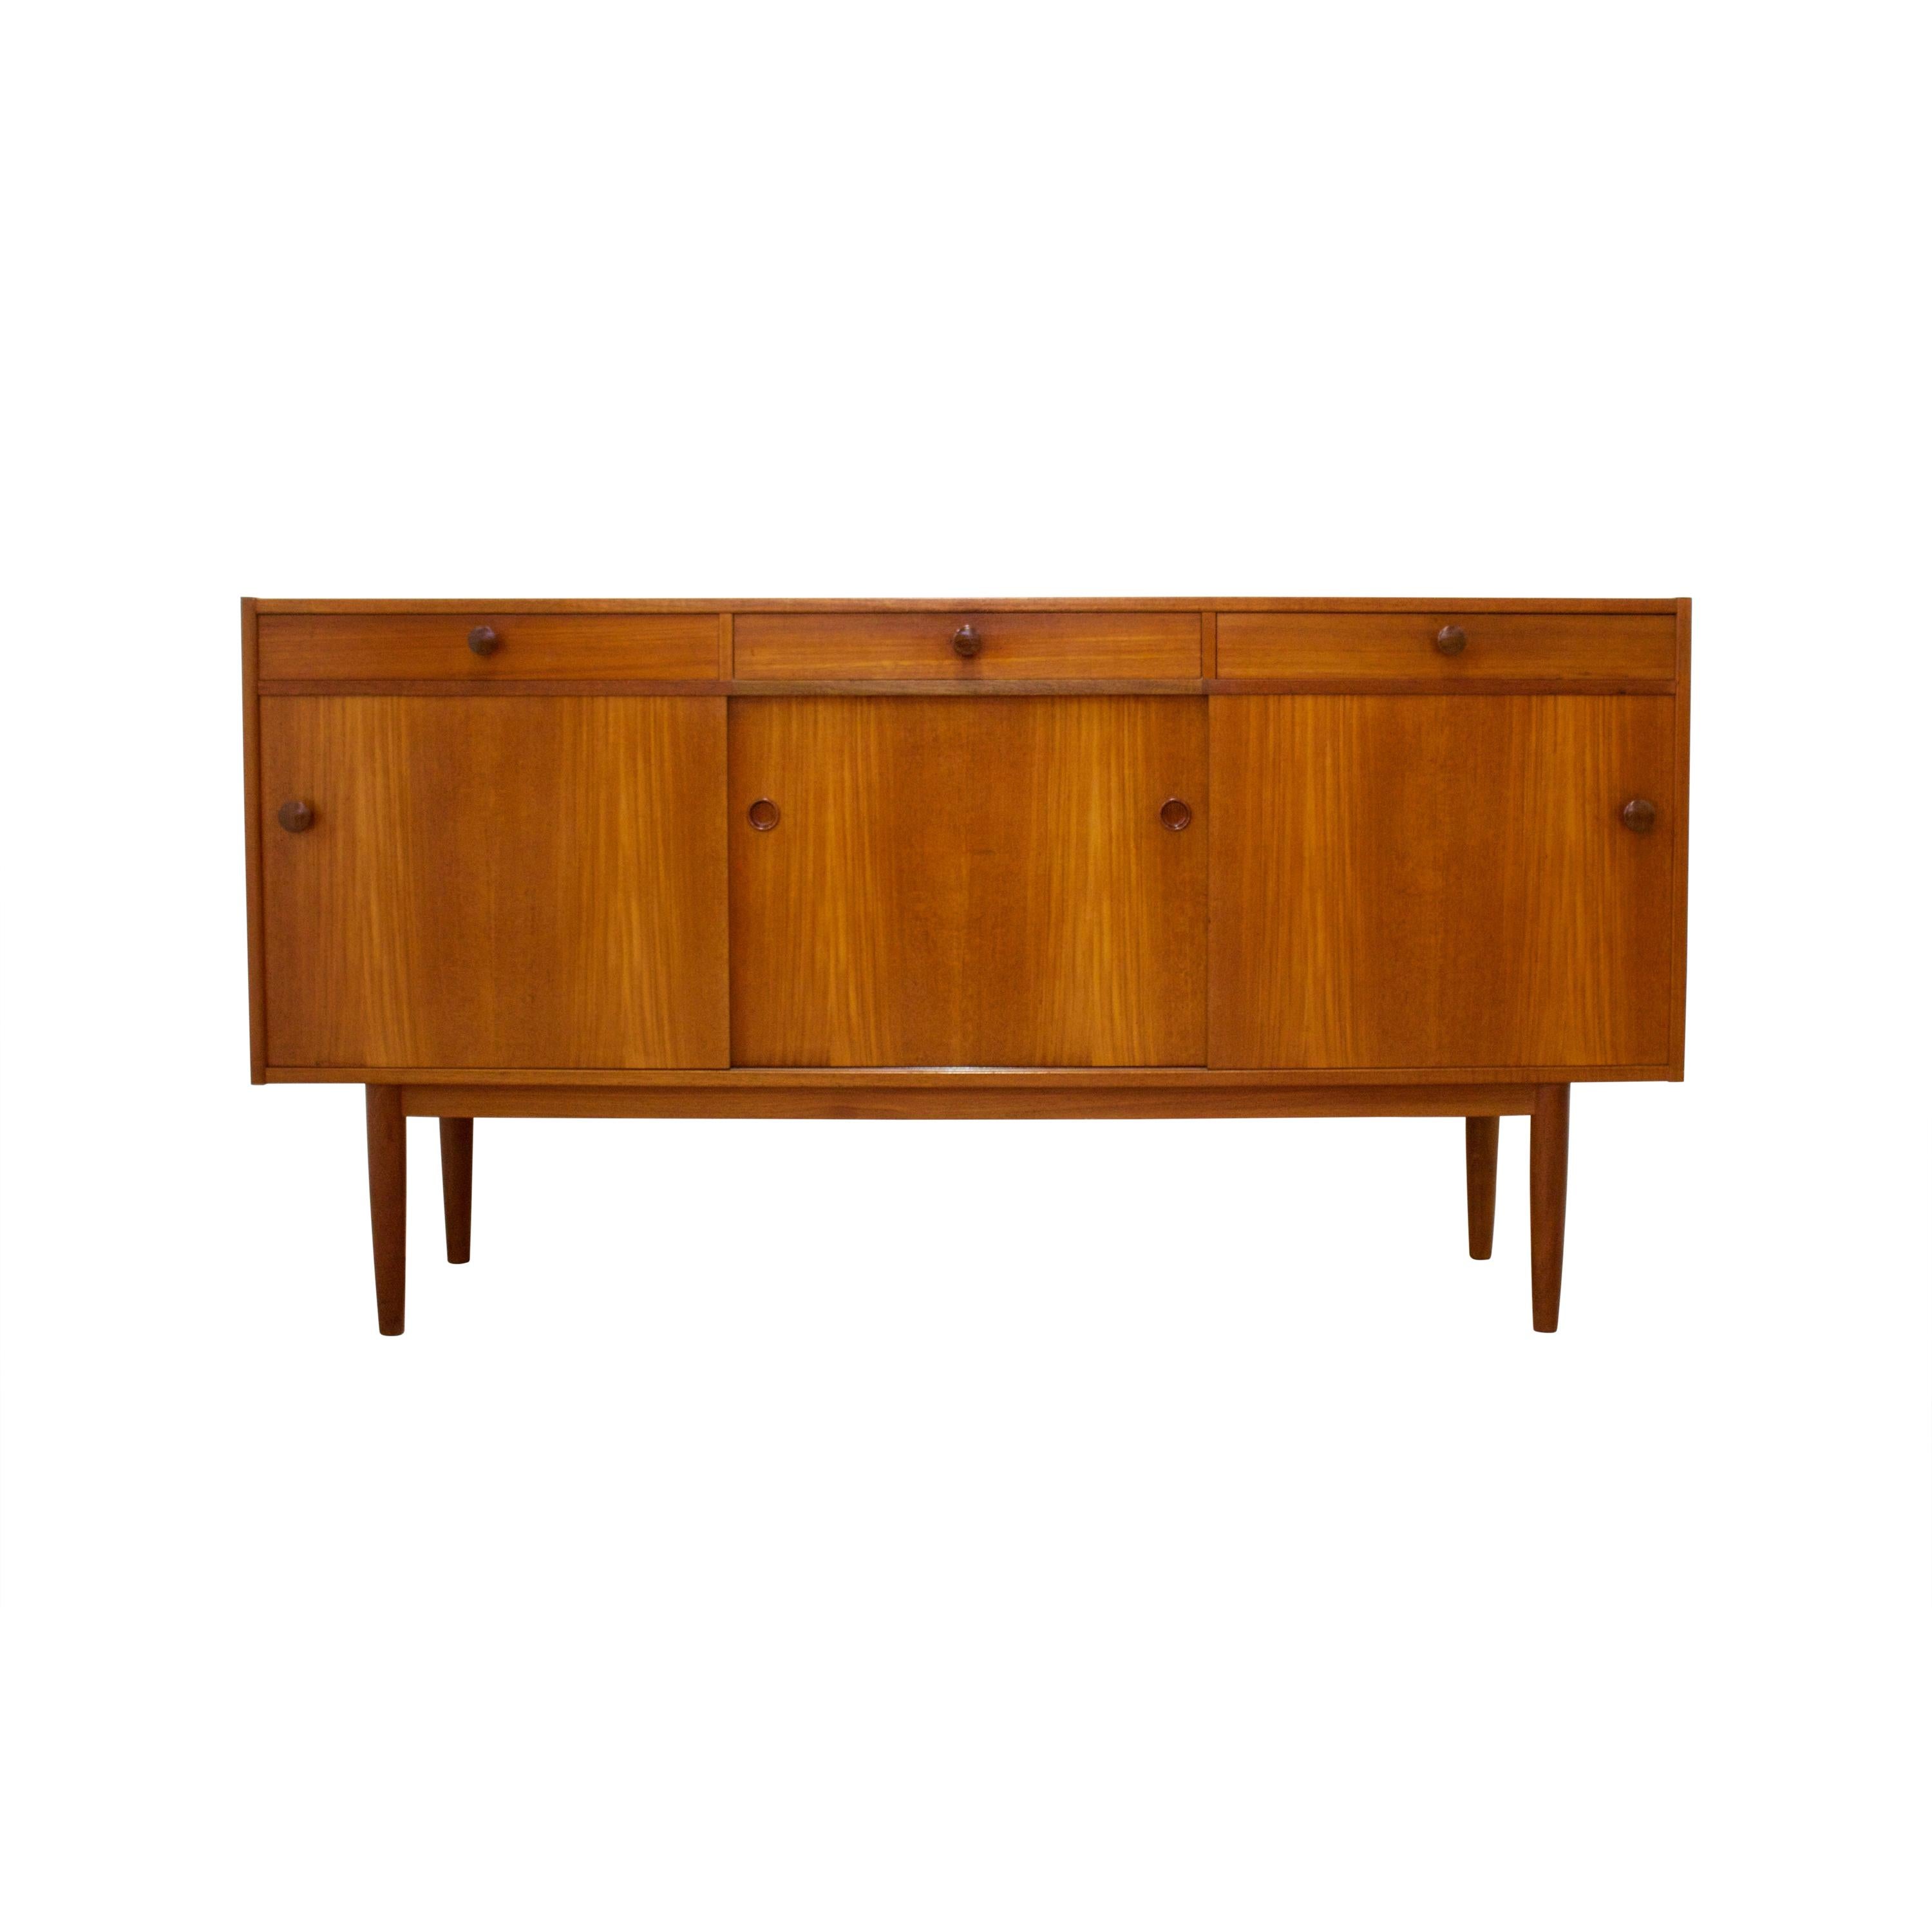 Midcentury Teak Sideboard by Nils Jonsson for Troeds, 1960s For Sale